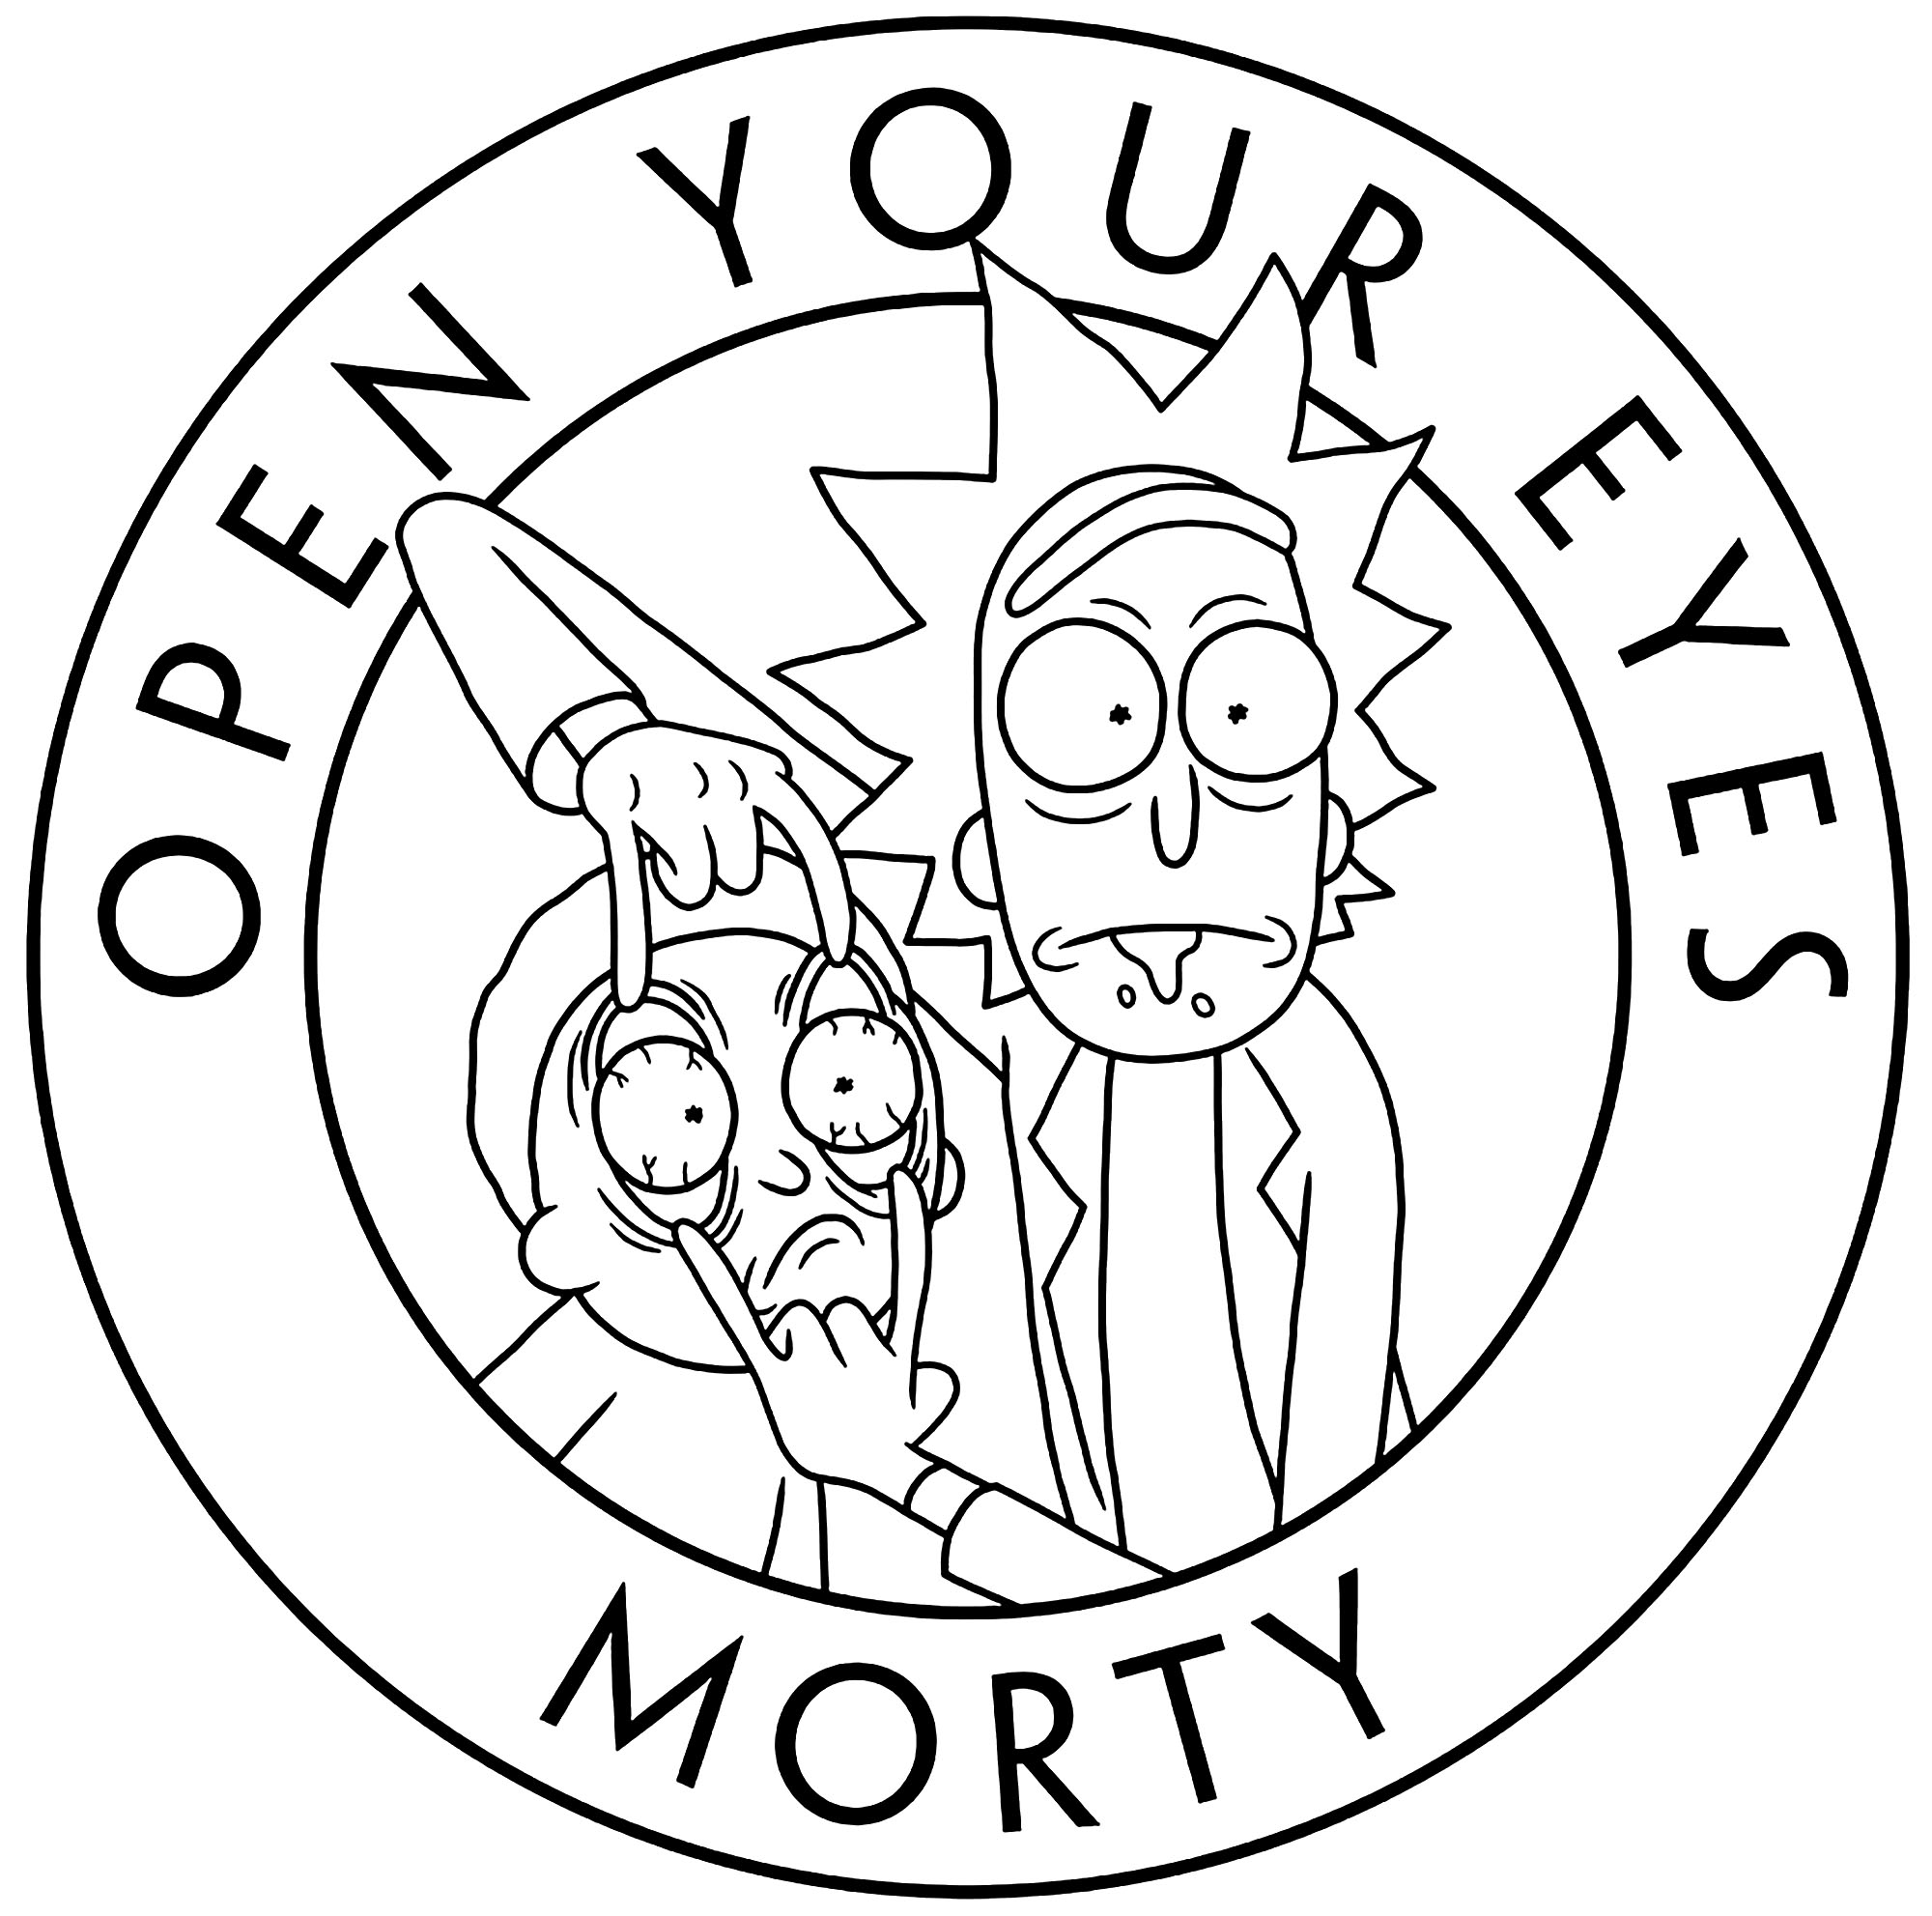 Simple coloring page with Rick and Morty and the text 'Open your Eyes'